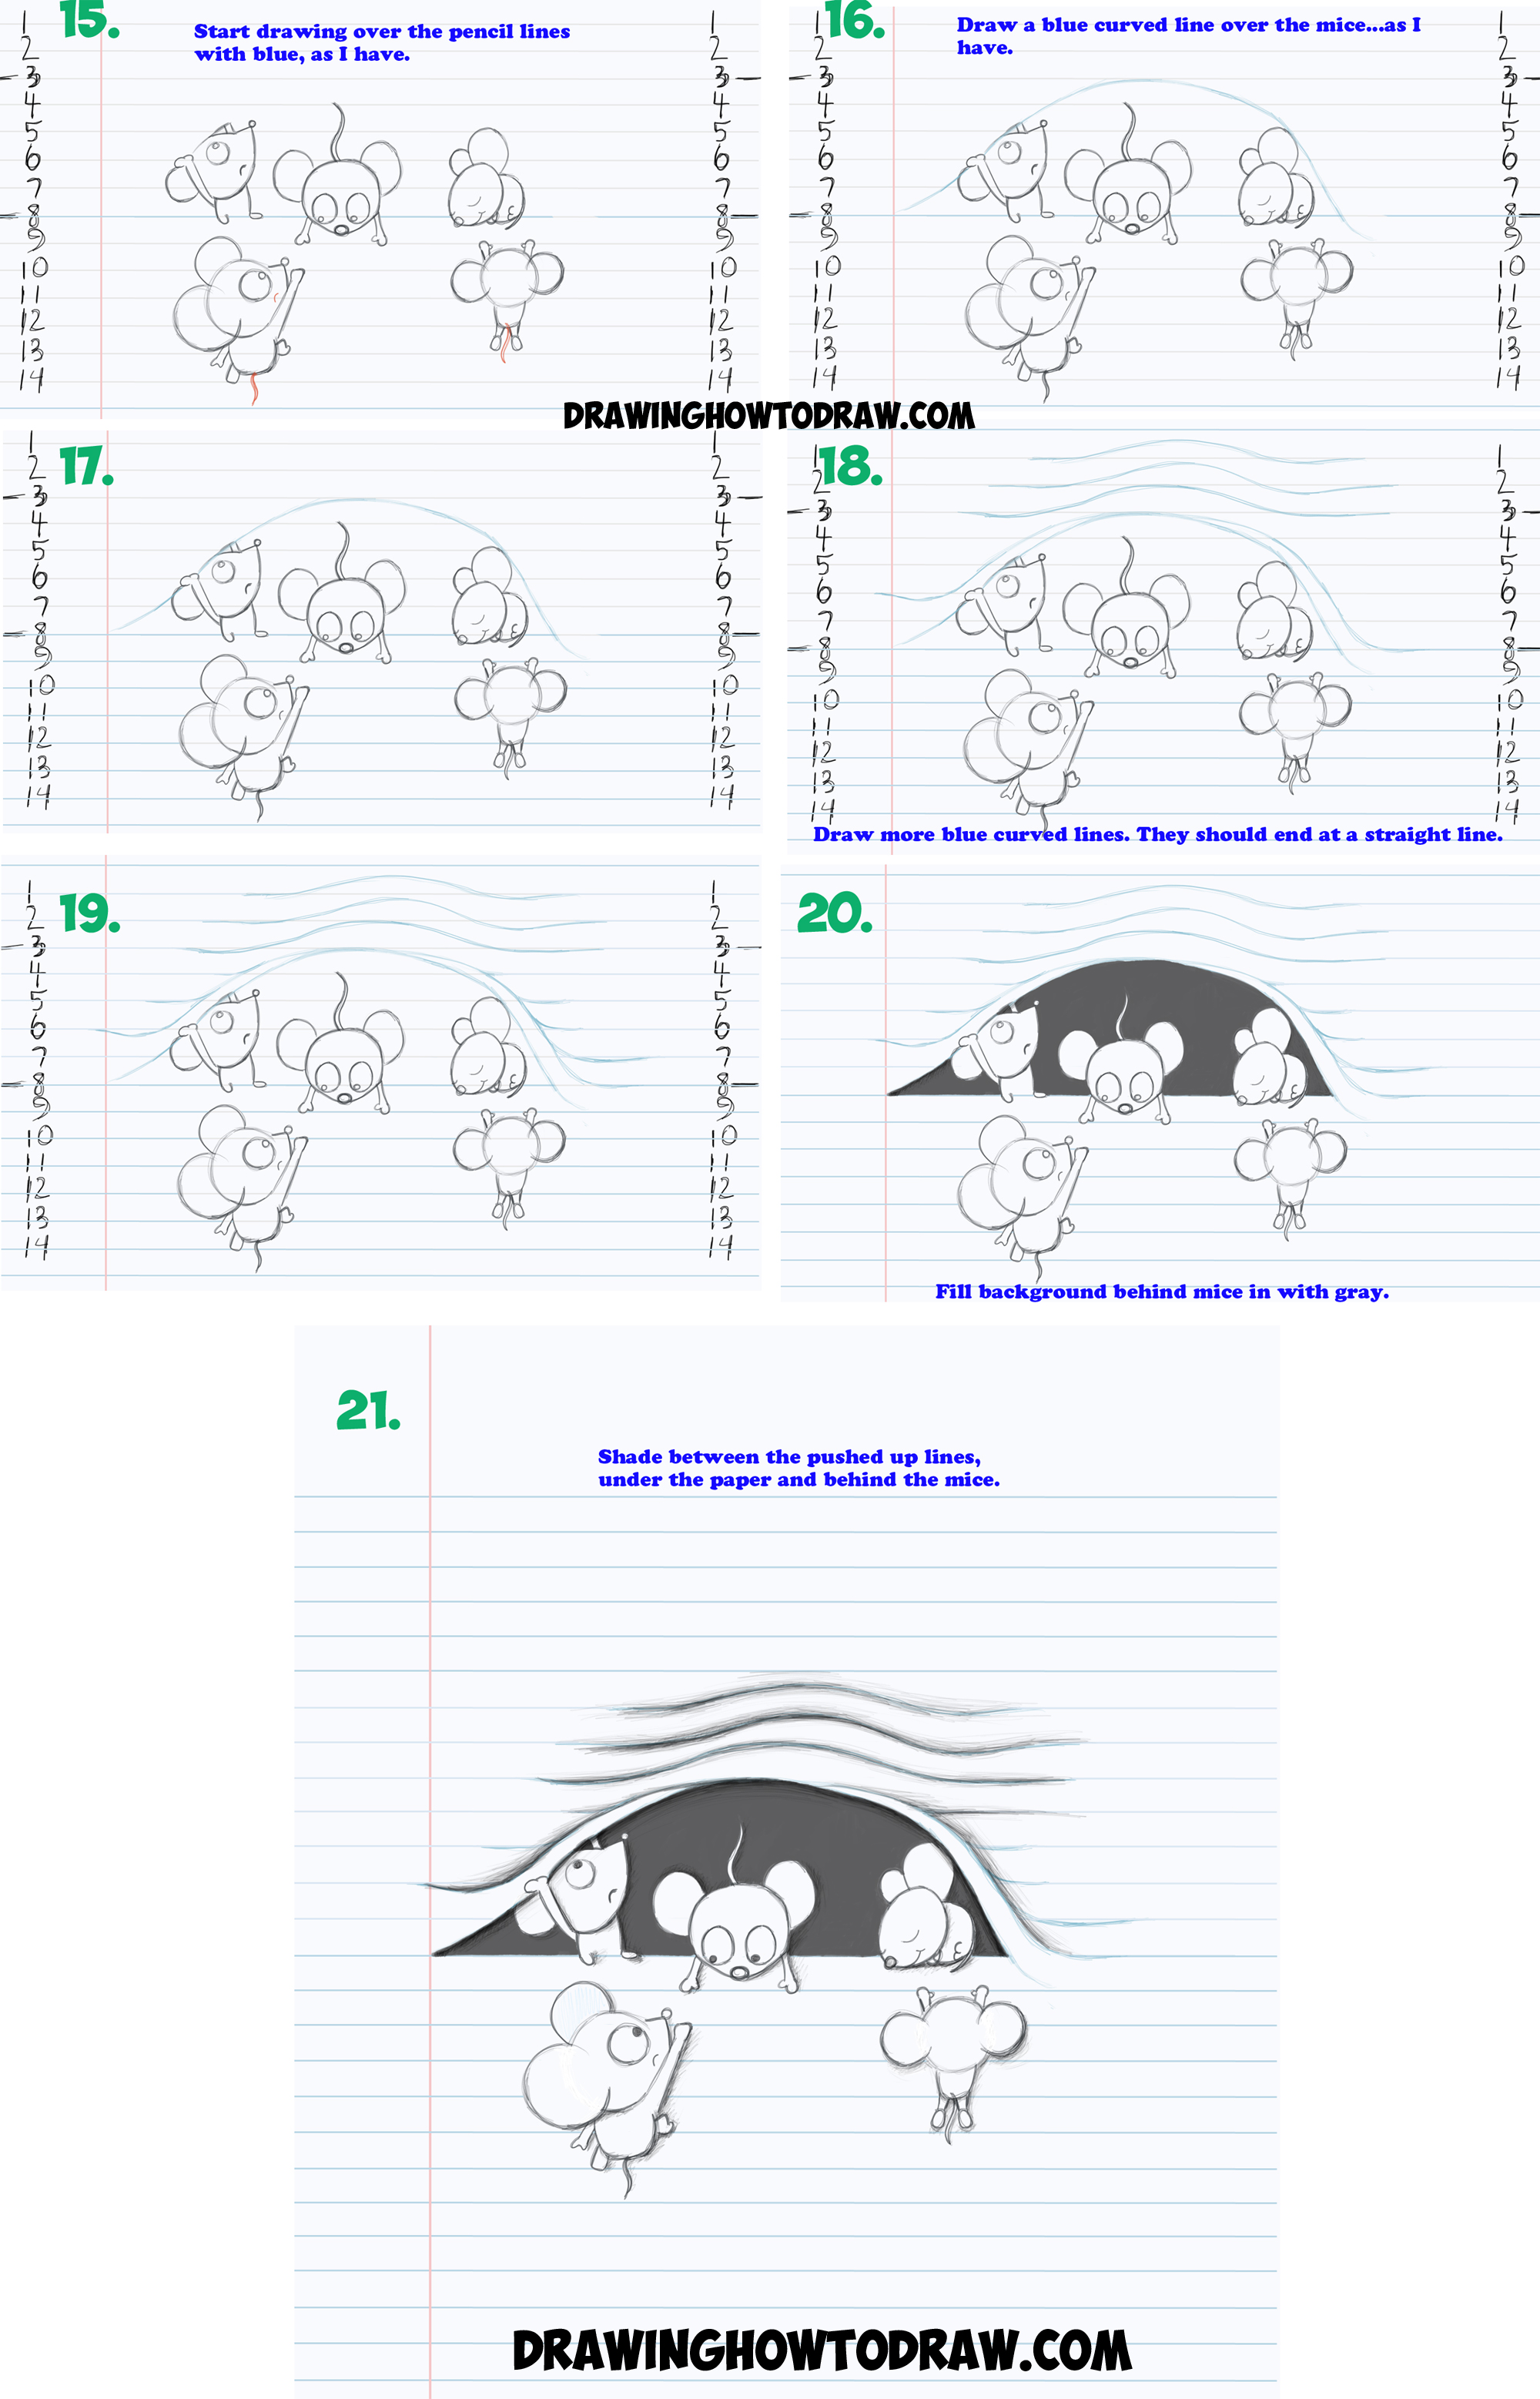 How to Draw Optical Illusion of Cartoon Mice Characters Climbing